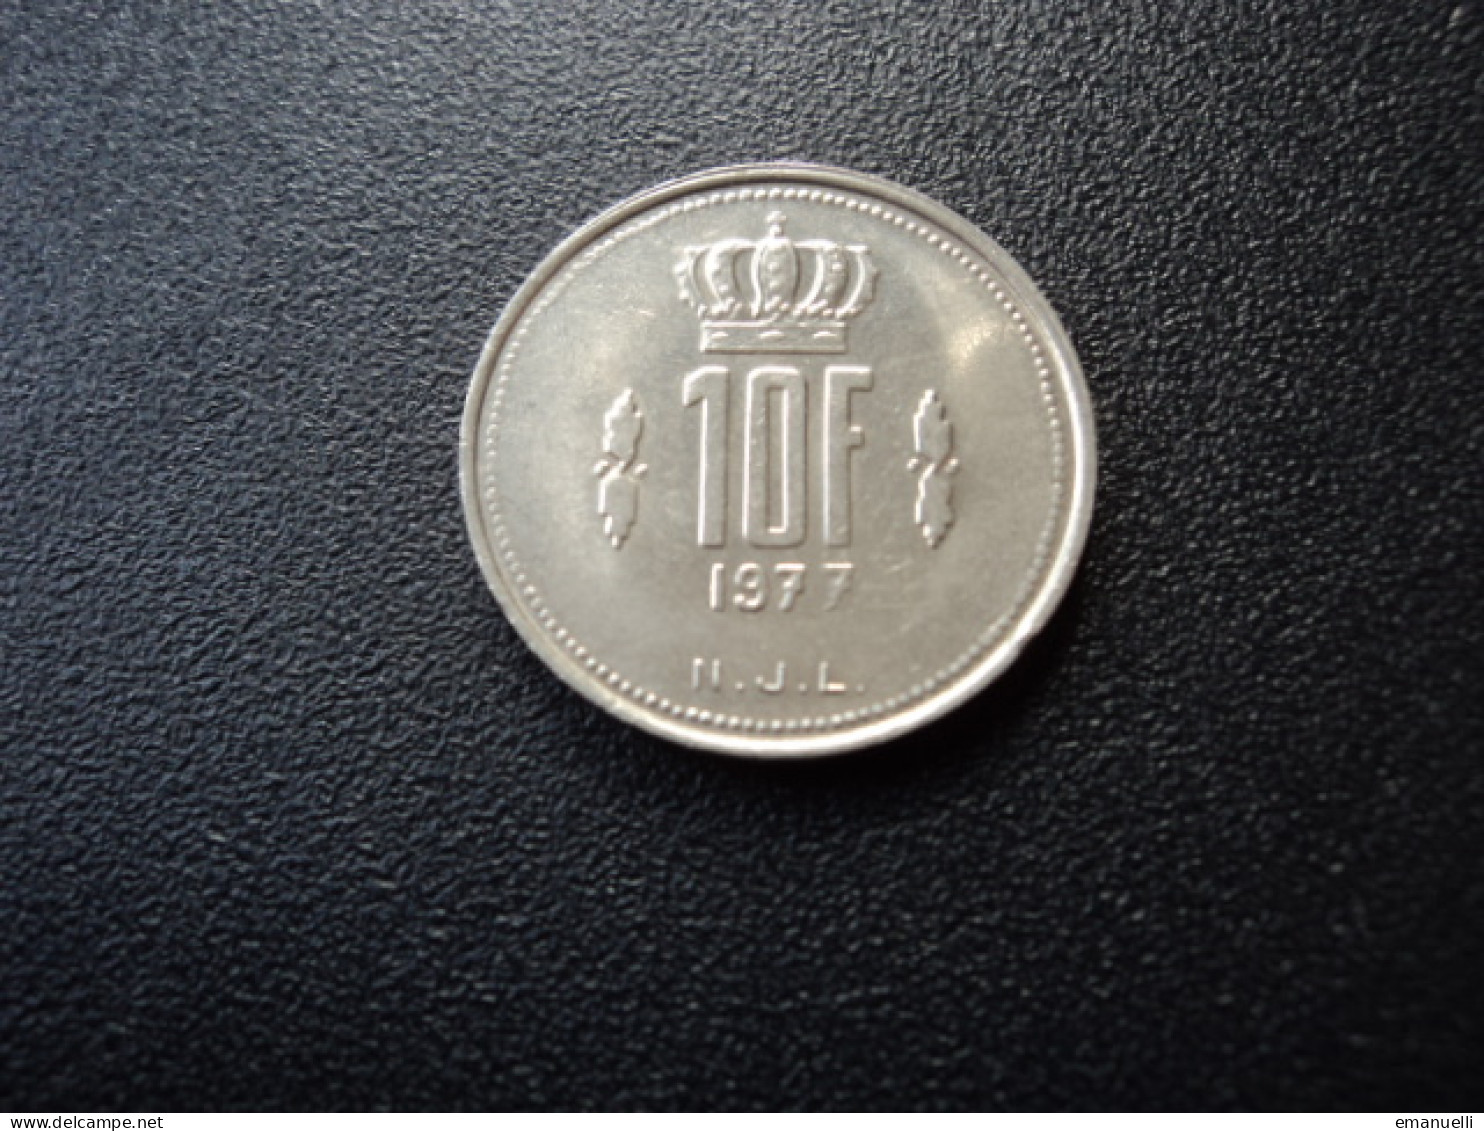 LUXEMBOURG  : 10 FRANCS  1977  KM 57     SUP * - Luxembourg